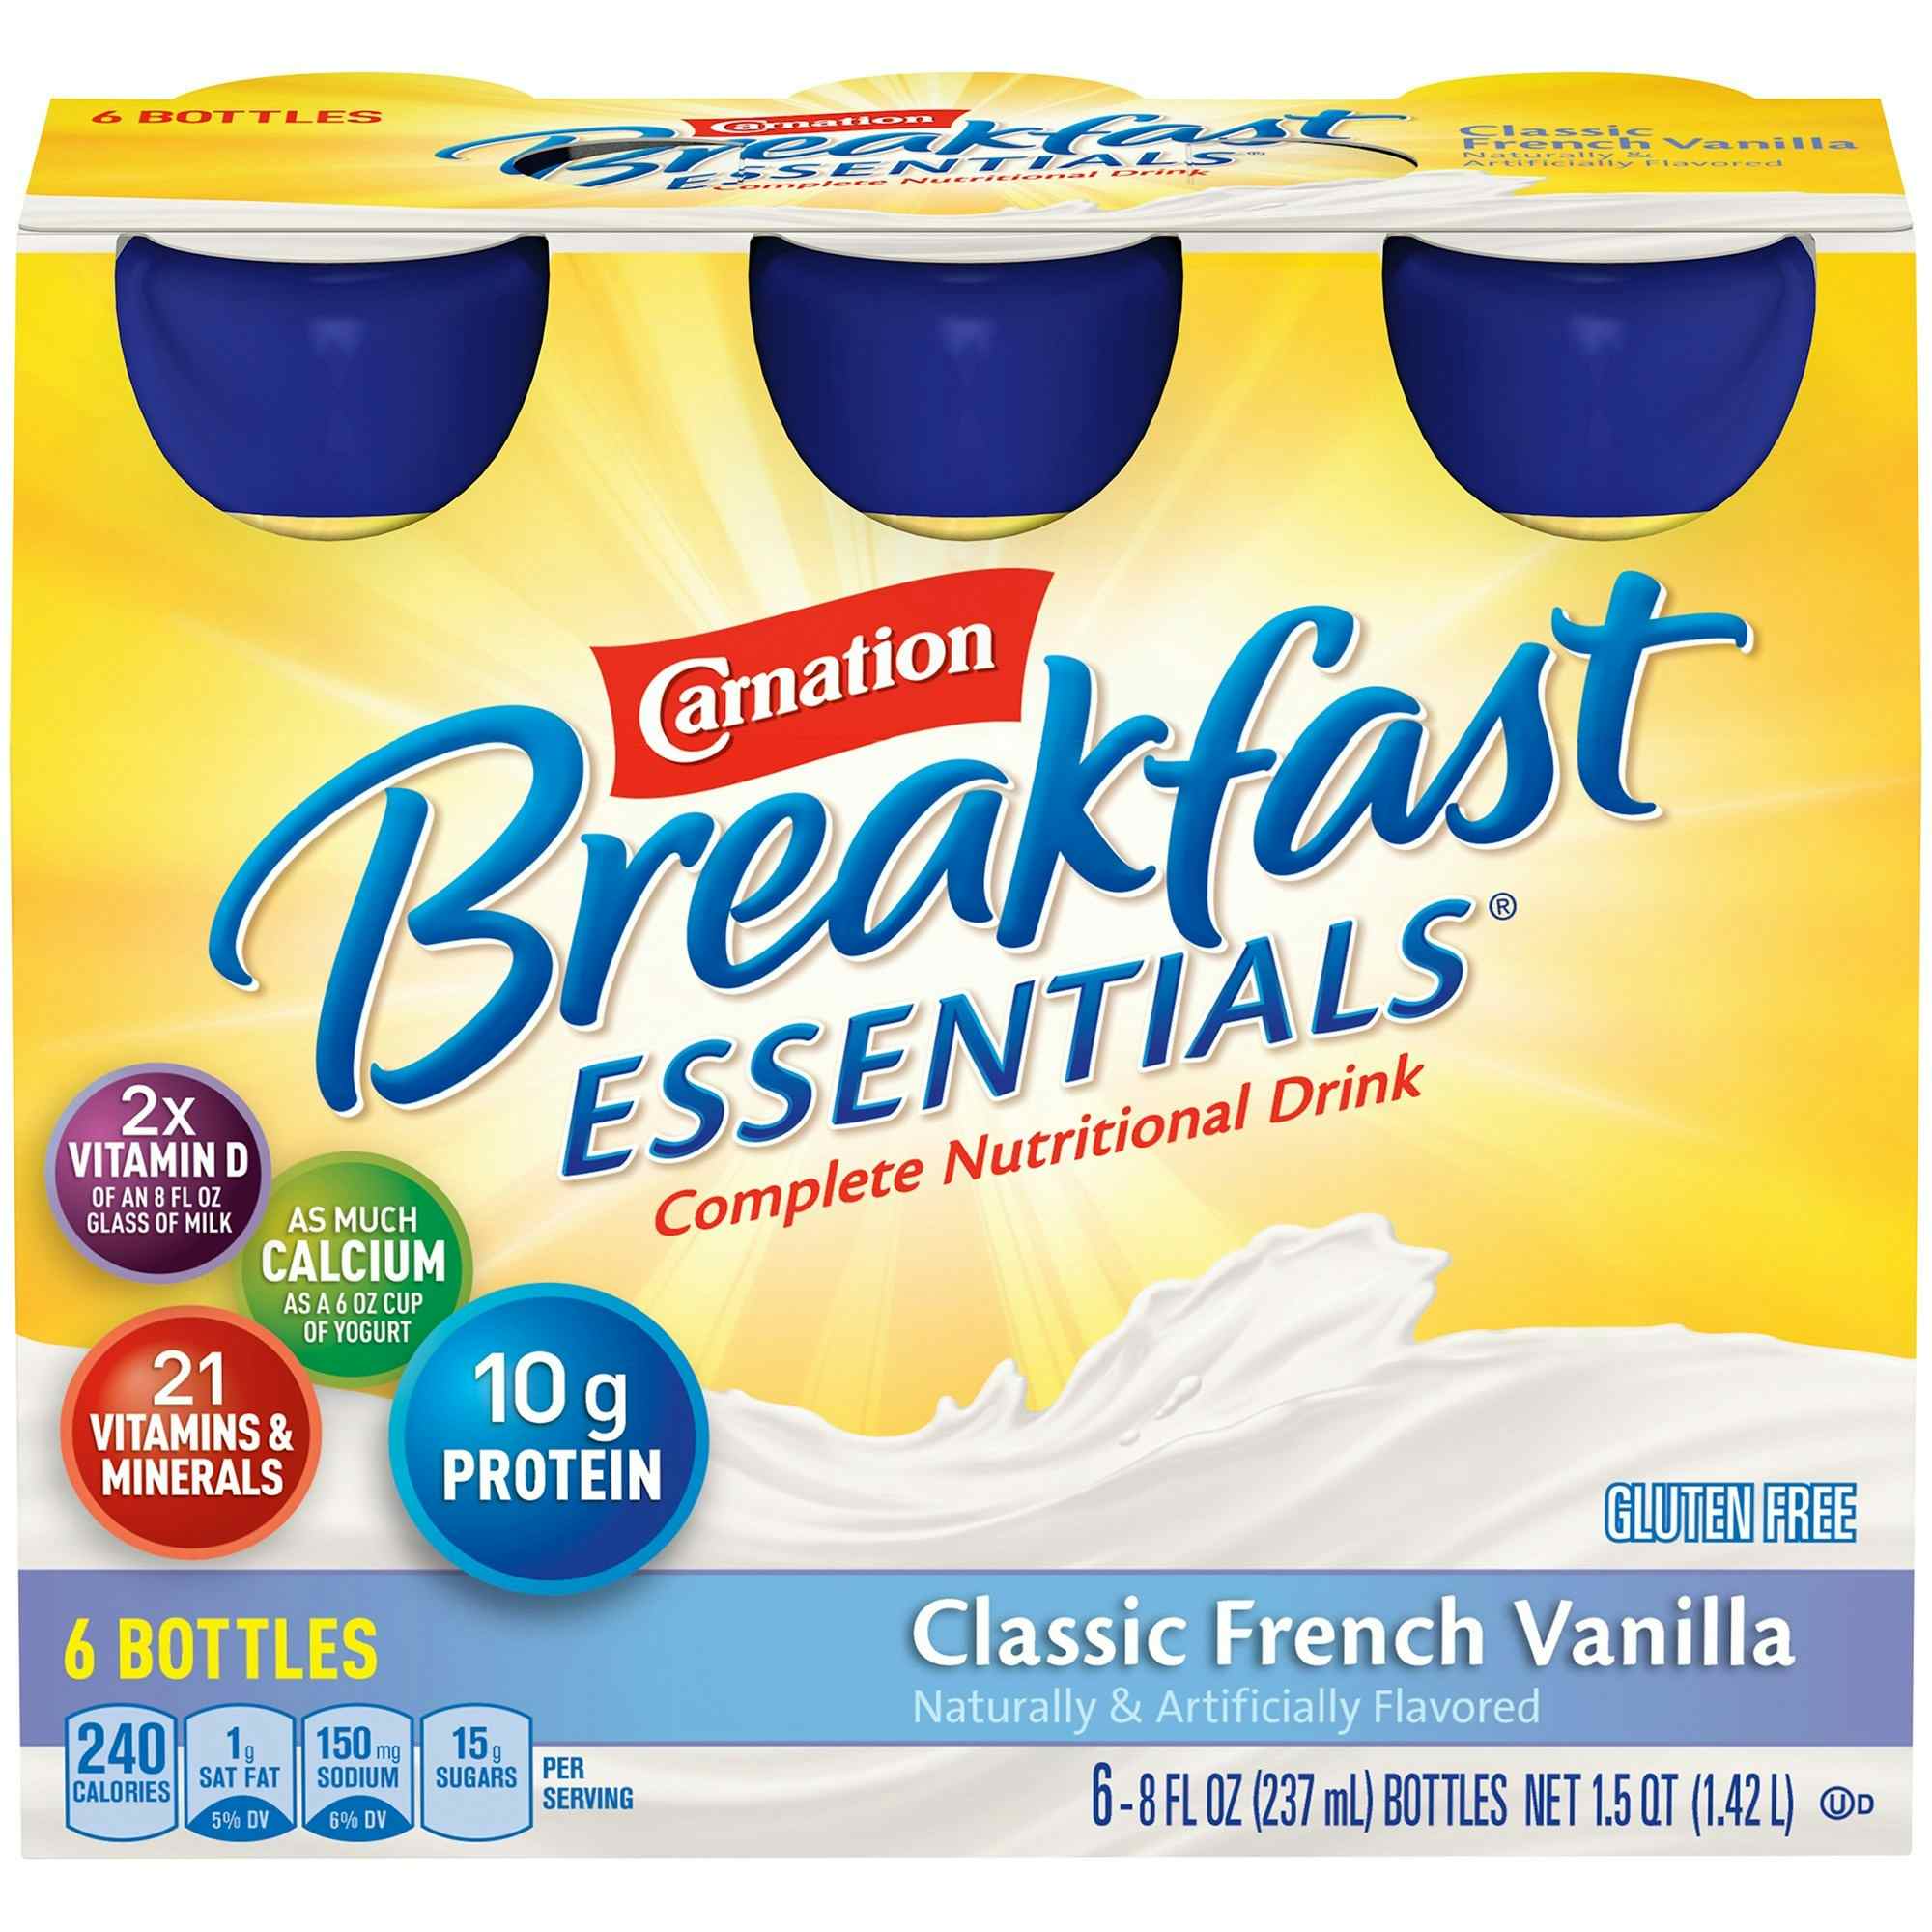 Carnation Breakfast Essentials Complete Nutritional Drink, Bottle, Classic French Vanilla, 8 oz,, 12230501, Pack of 6